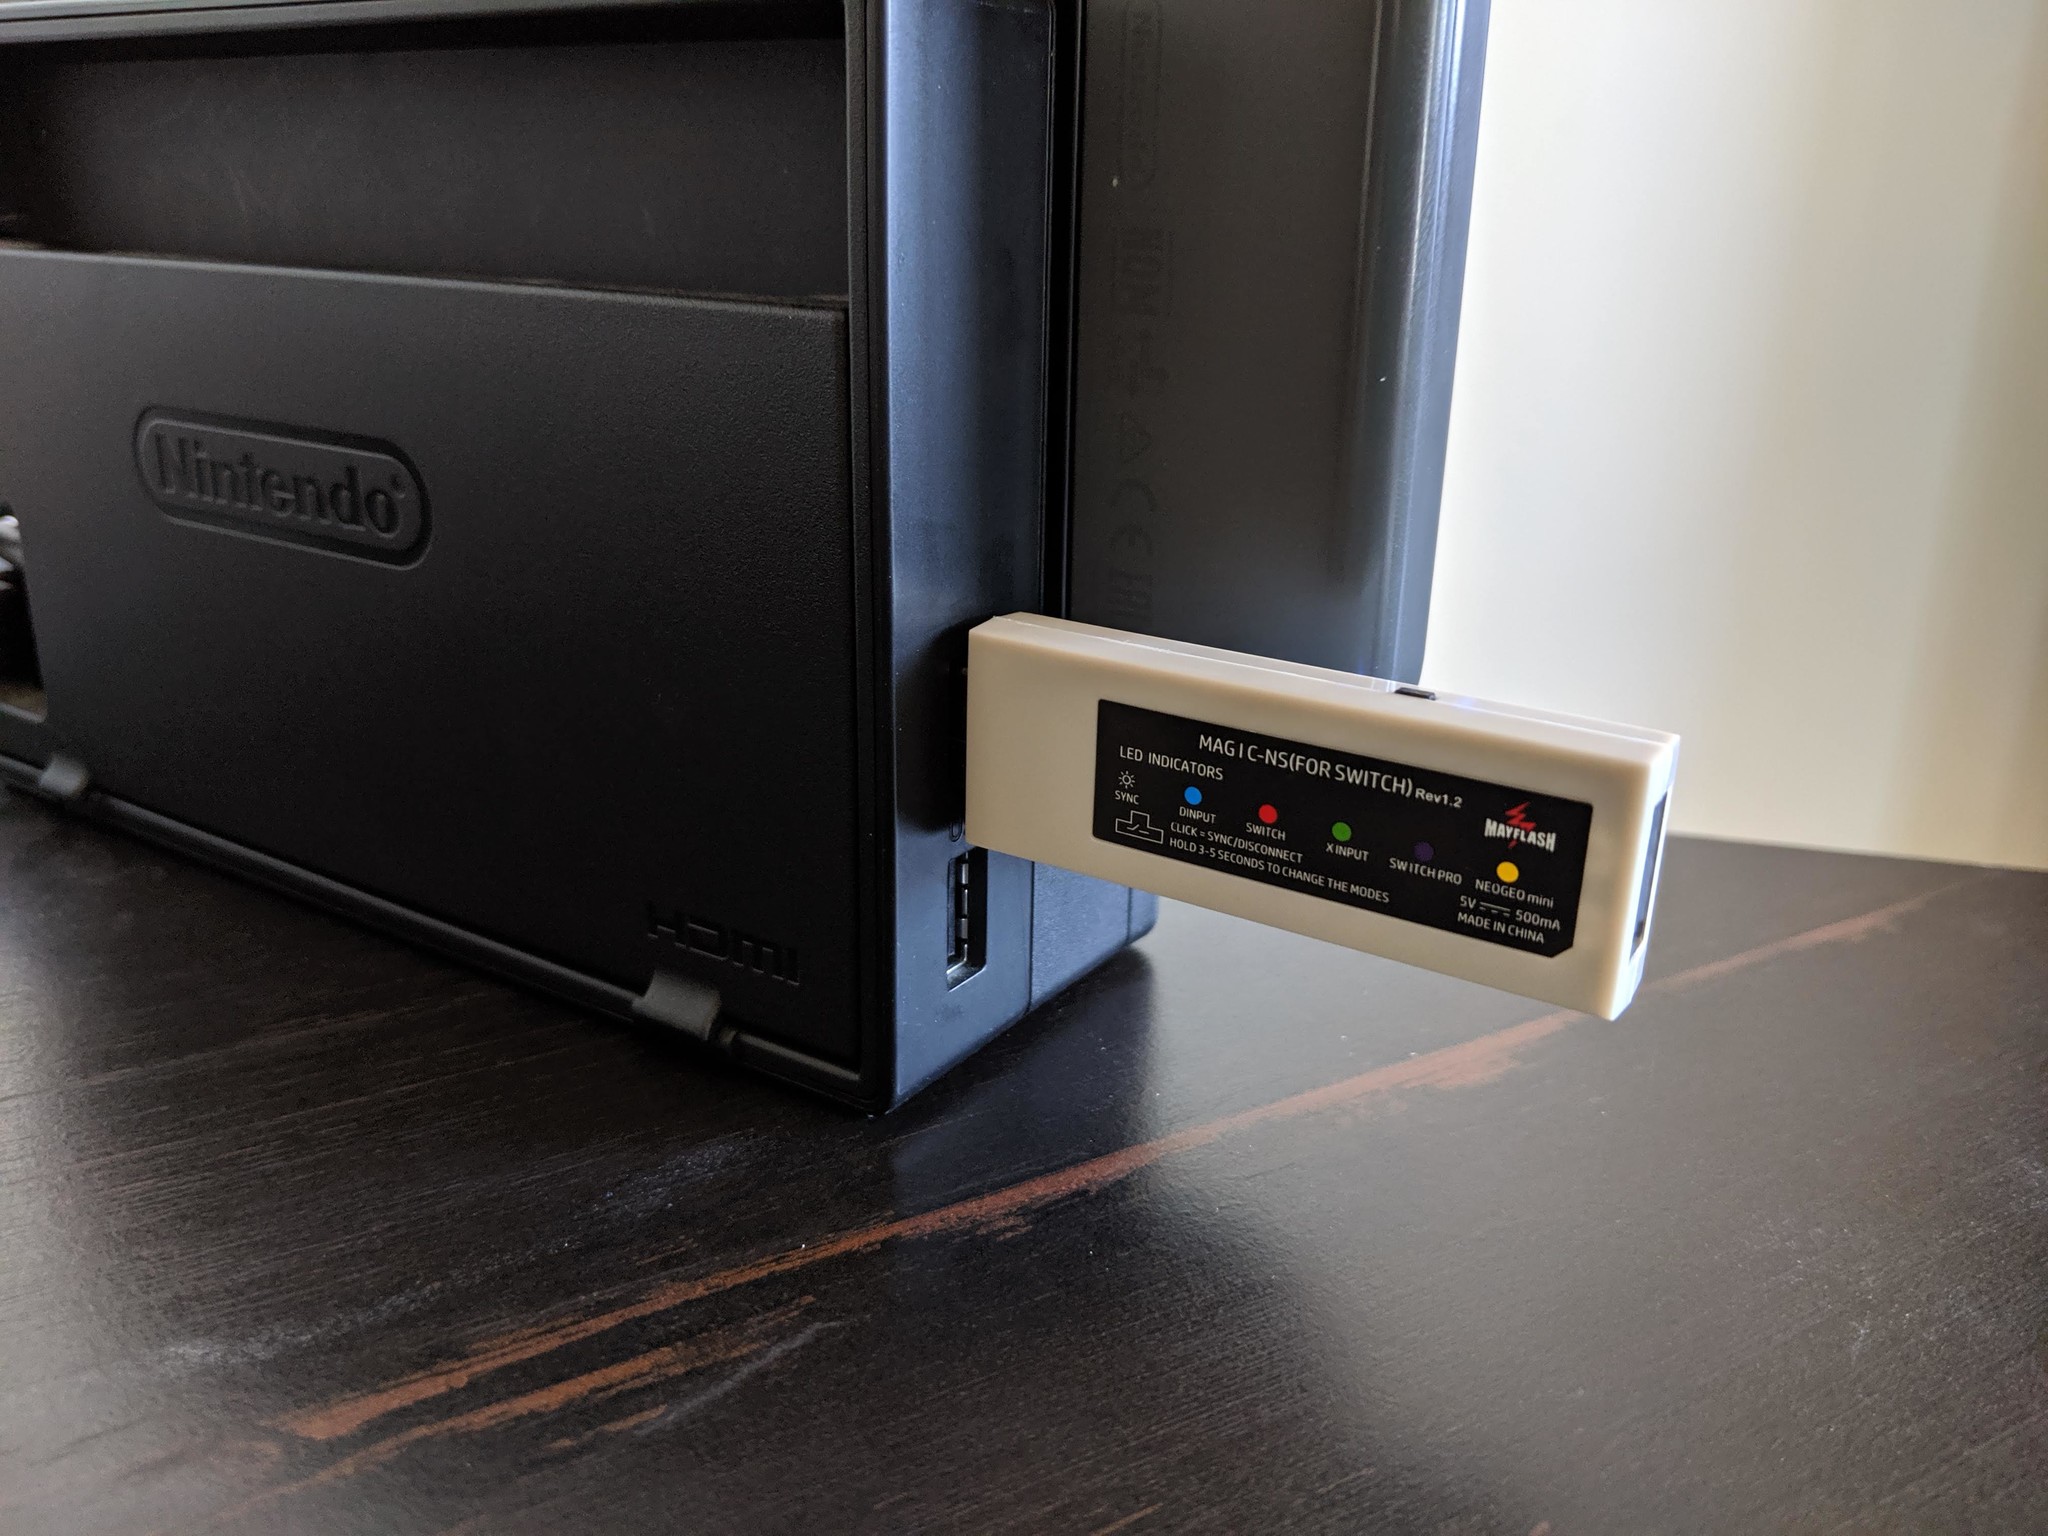 How to connect your Xbox One controller with the Nintendo Switch in wireless docked mode step one: Insert the Mayflash Magic-NS Adapter into one of the Nintendo Switch's USB ports